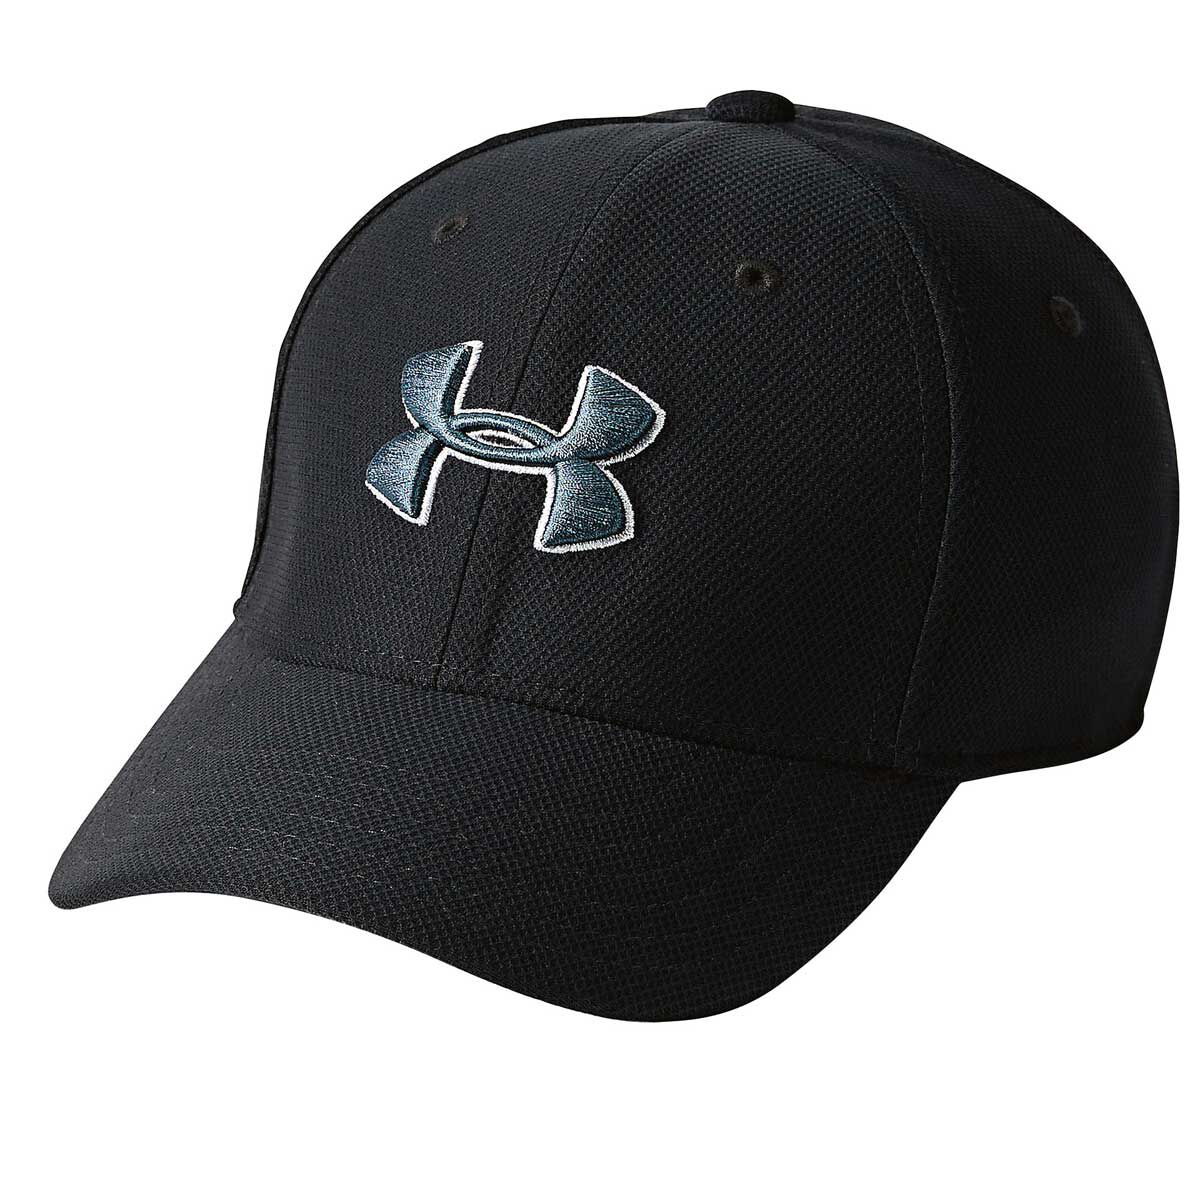 Two under armor fitted hats. Both M/L and NWT